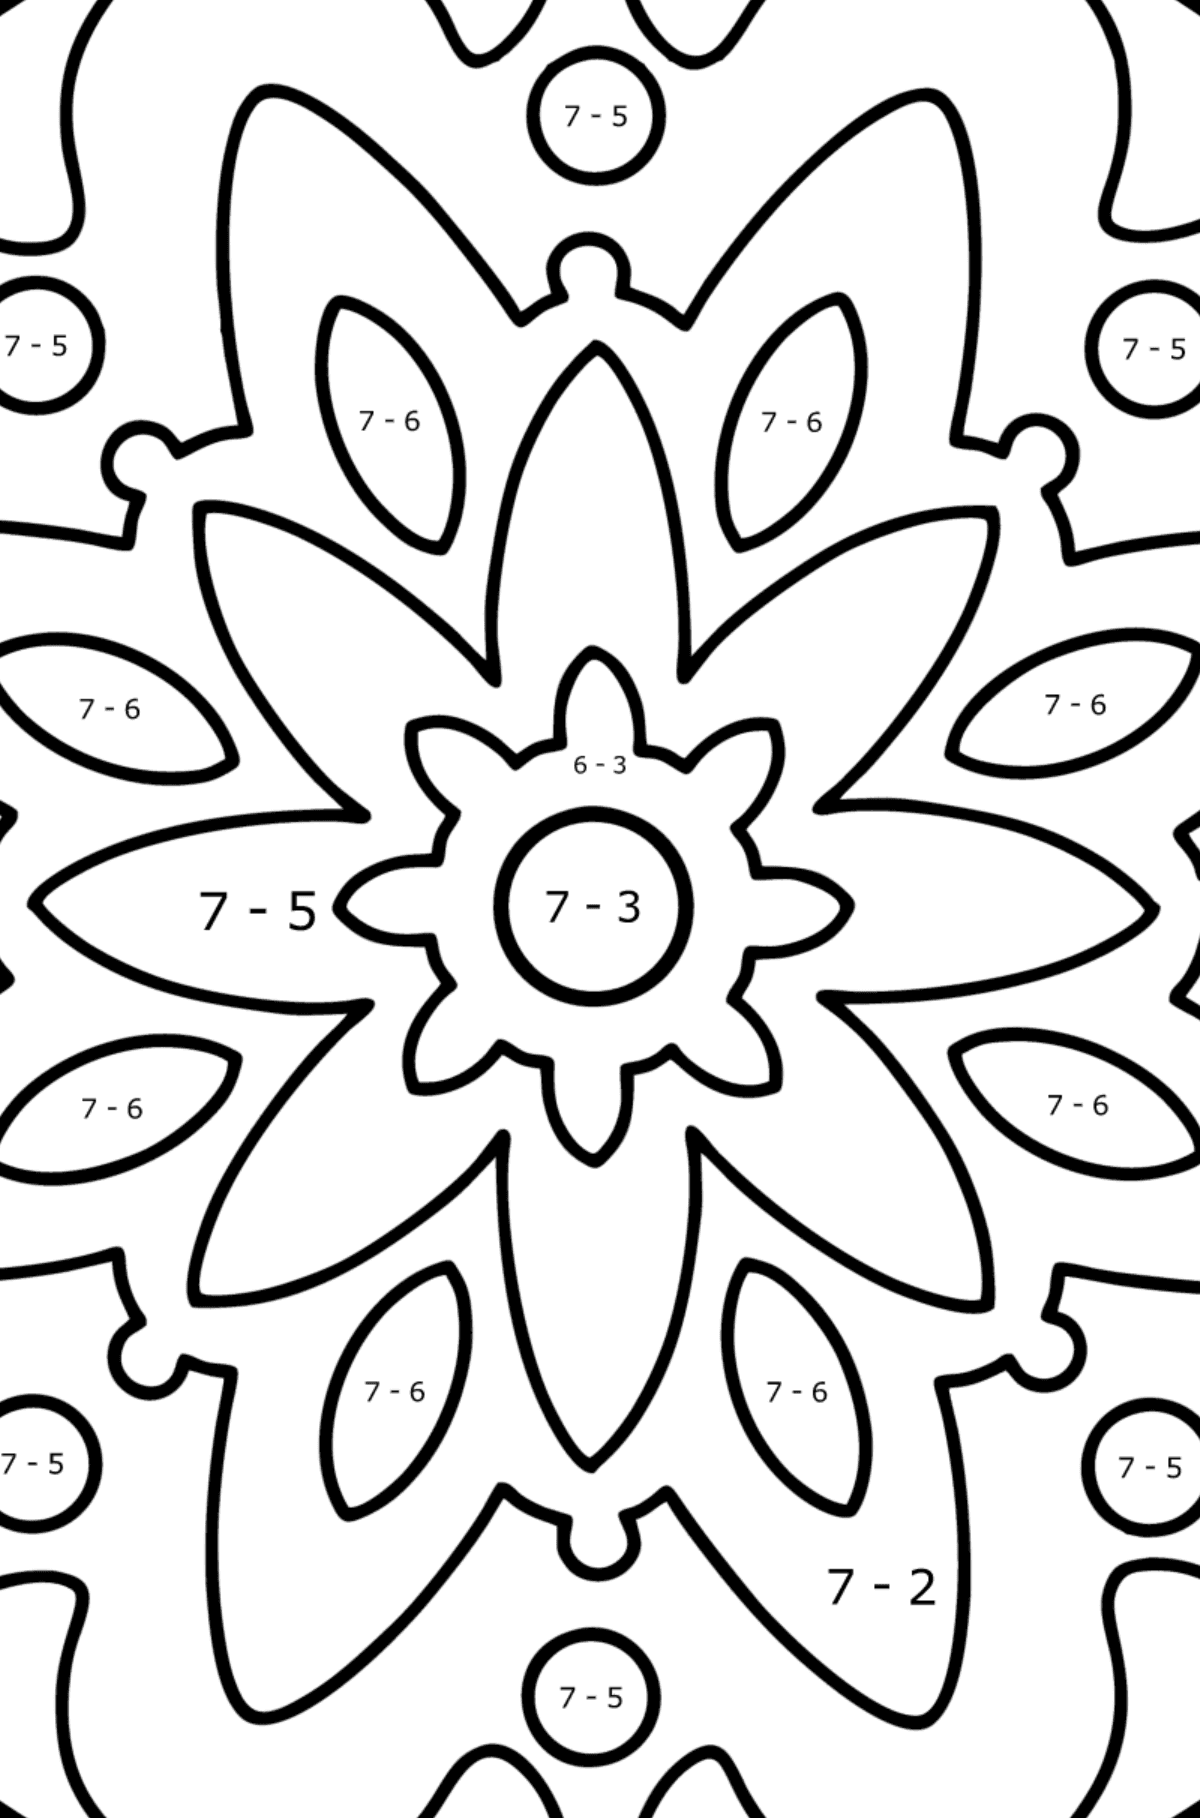 Mandala coloring page - 22 elements - Math Coloring - Subtraction for Kids